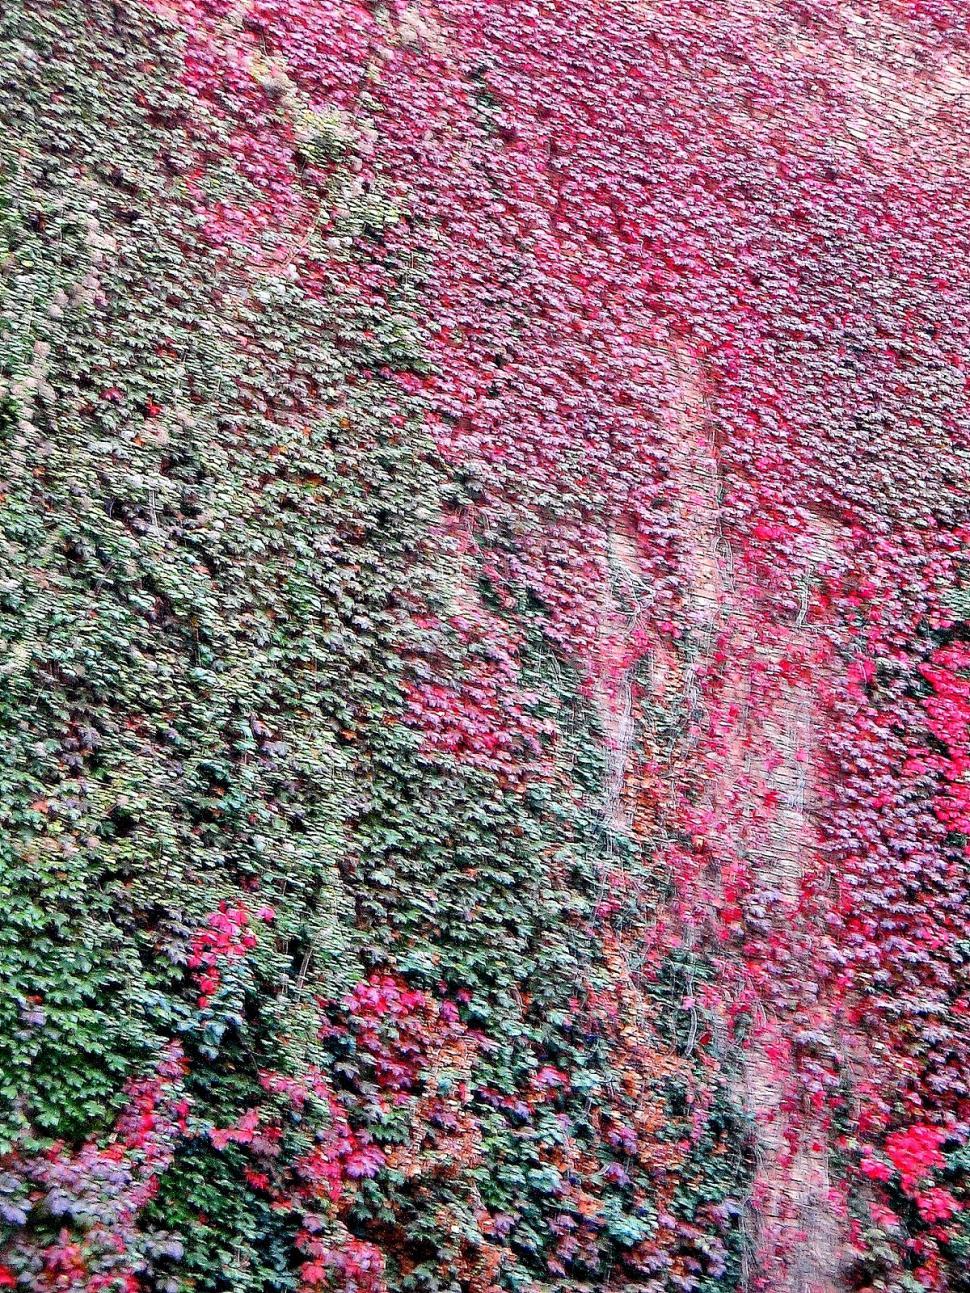 Free Image of The ivy 